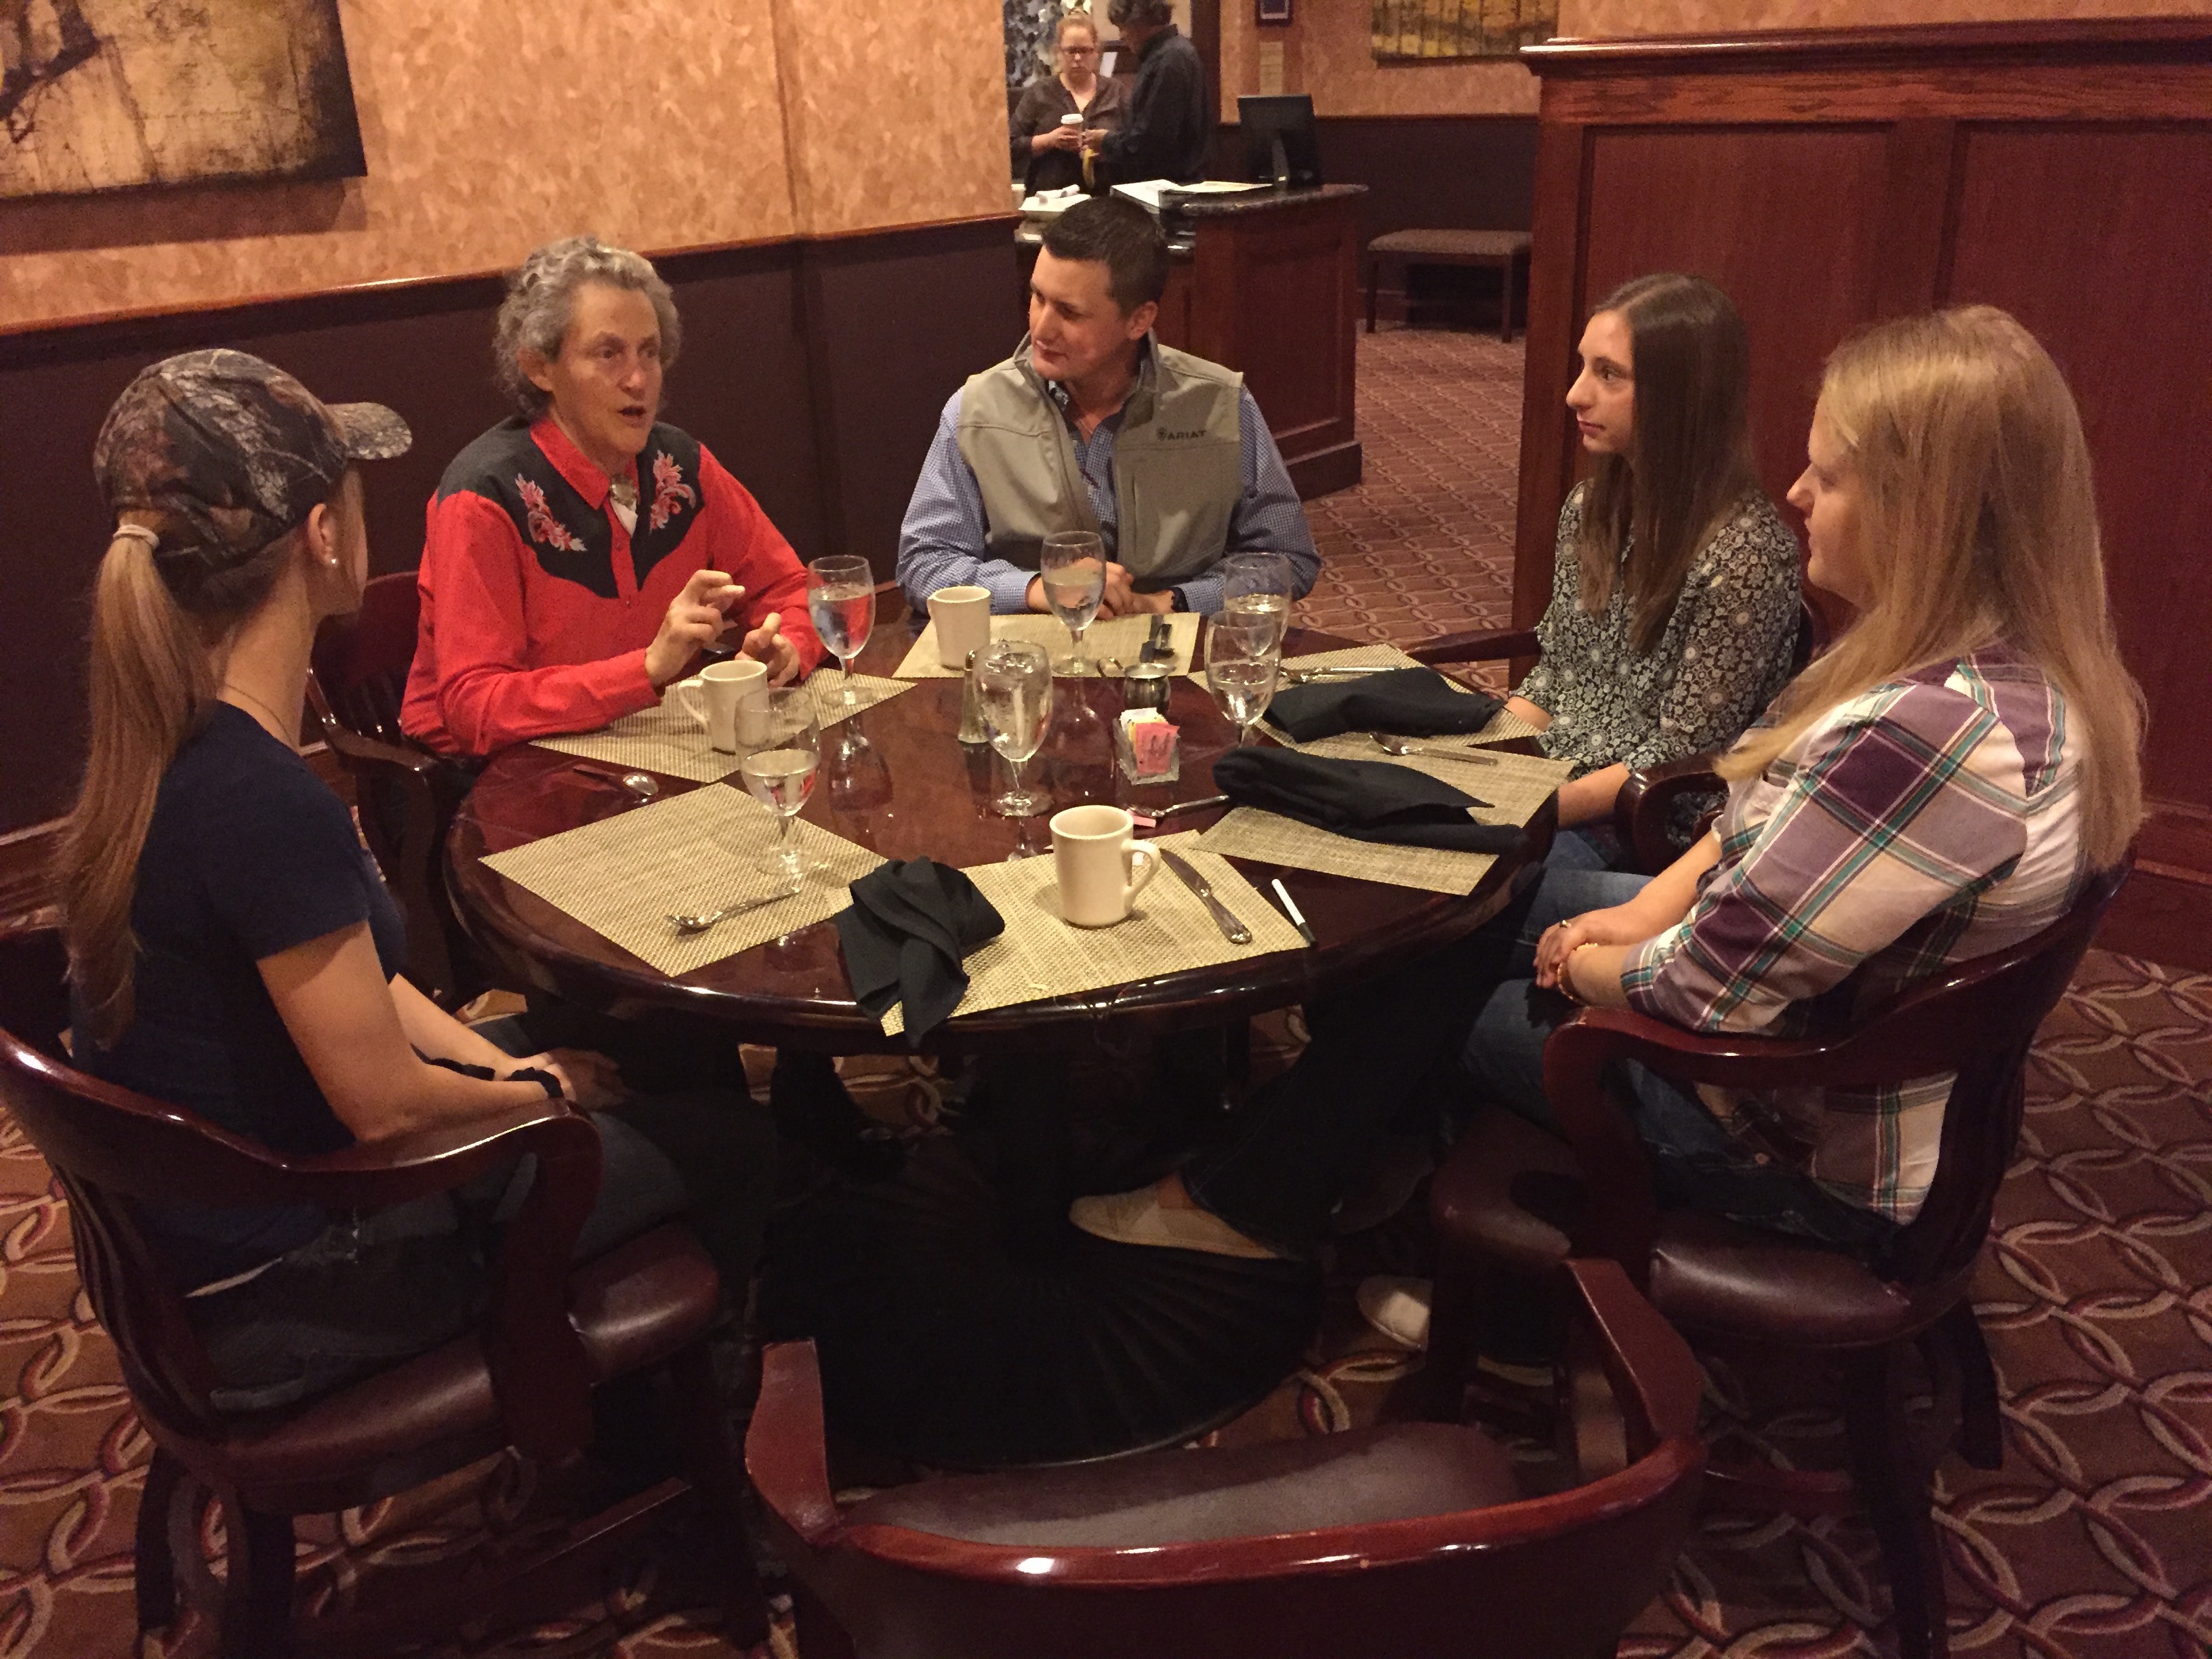 Dr. Temple Grandin having breakfast with students